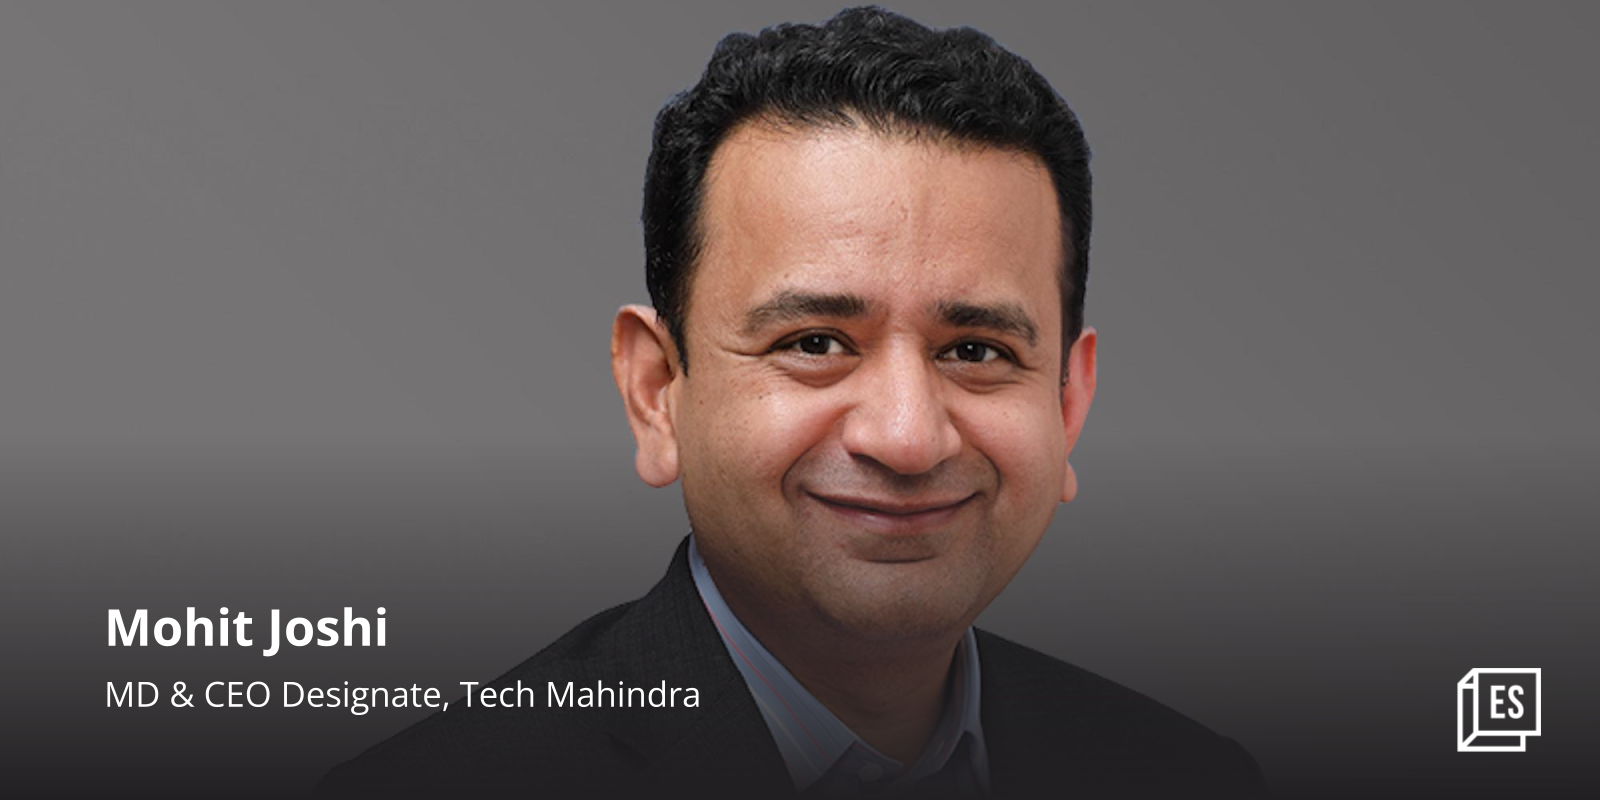 Tech Mahindra appoints Infosys President Mohit Joshi as new CEO

